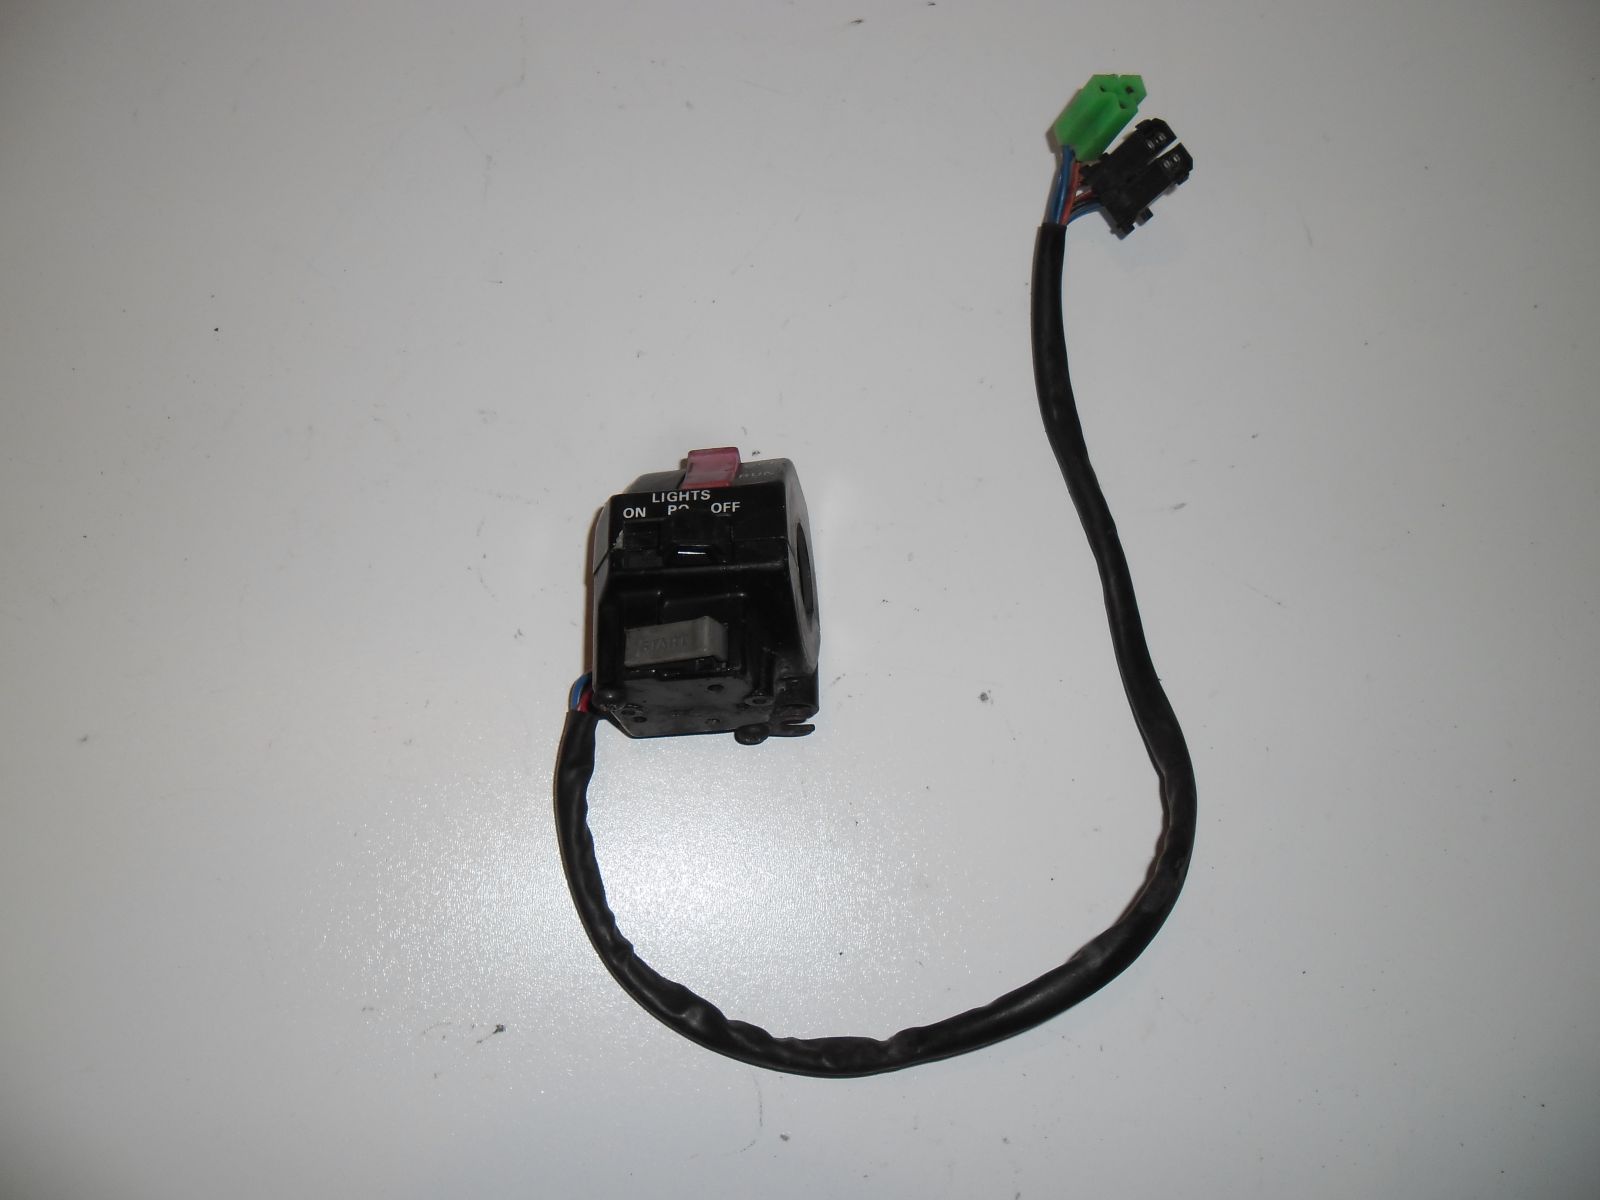  Yamaha XJ900 right steer switches